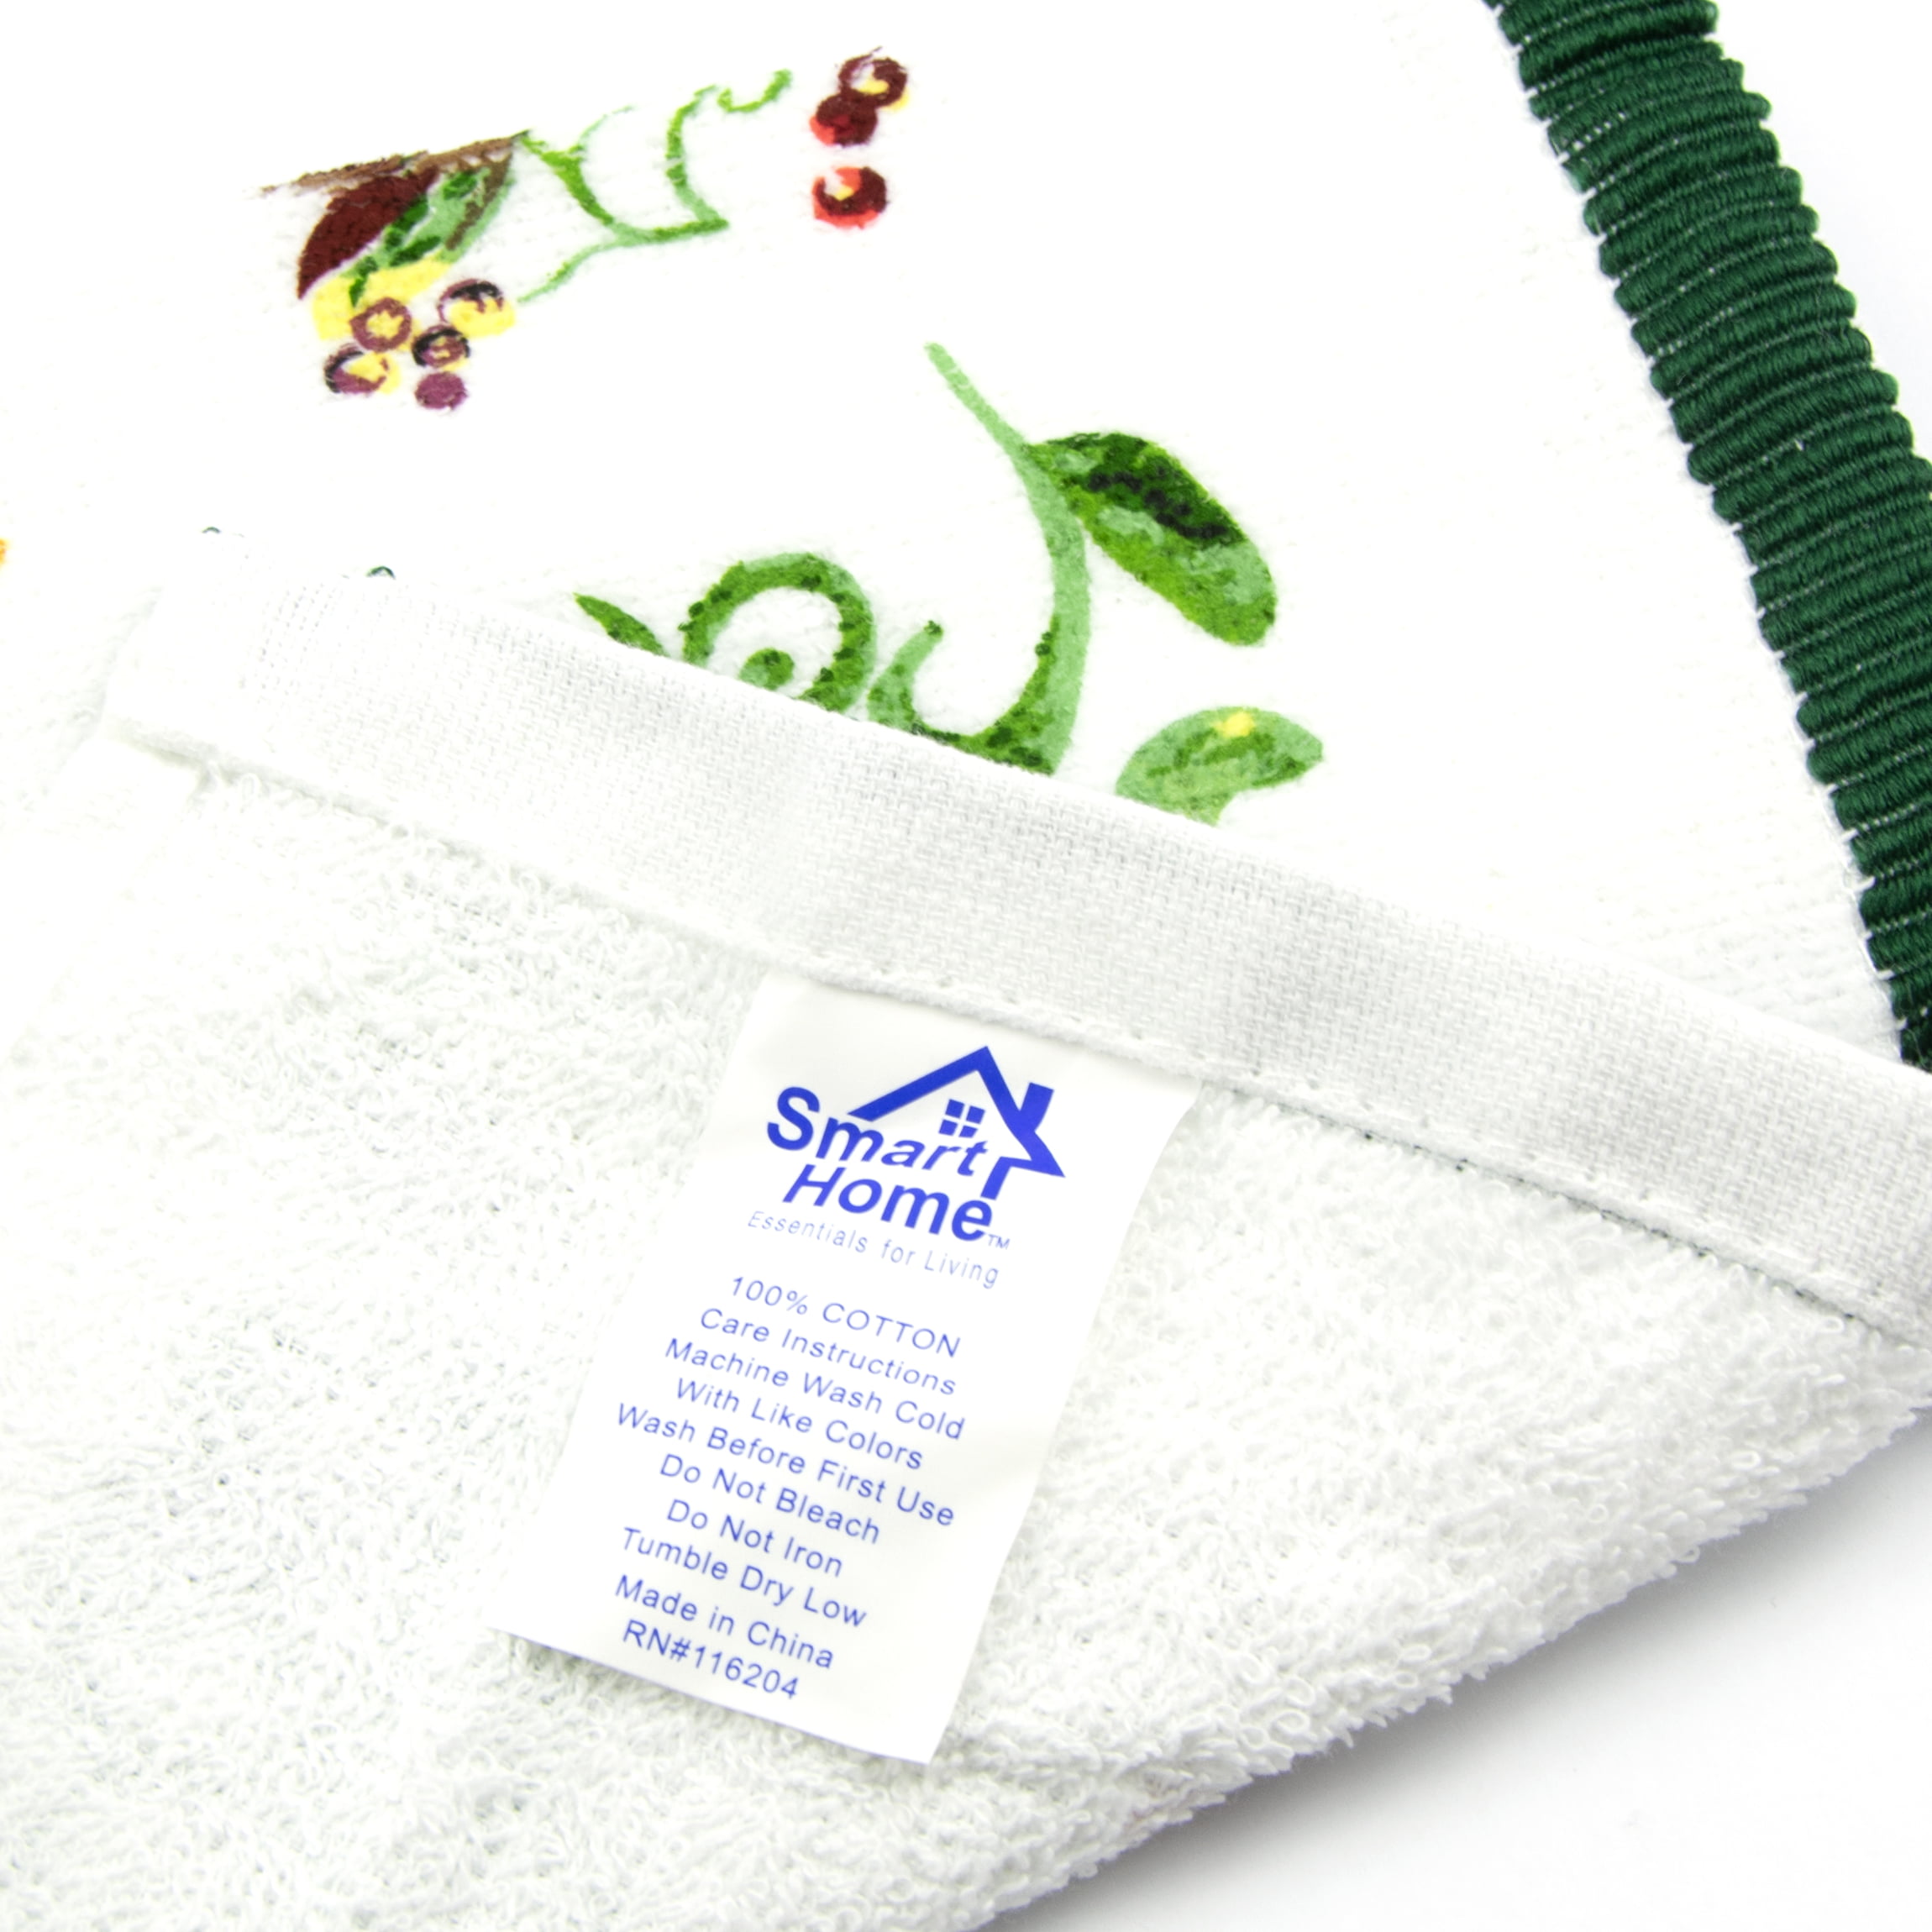 Fresh Picked Berries - Hanging Kitchen Towel with Button — Sunnyside Haven